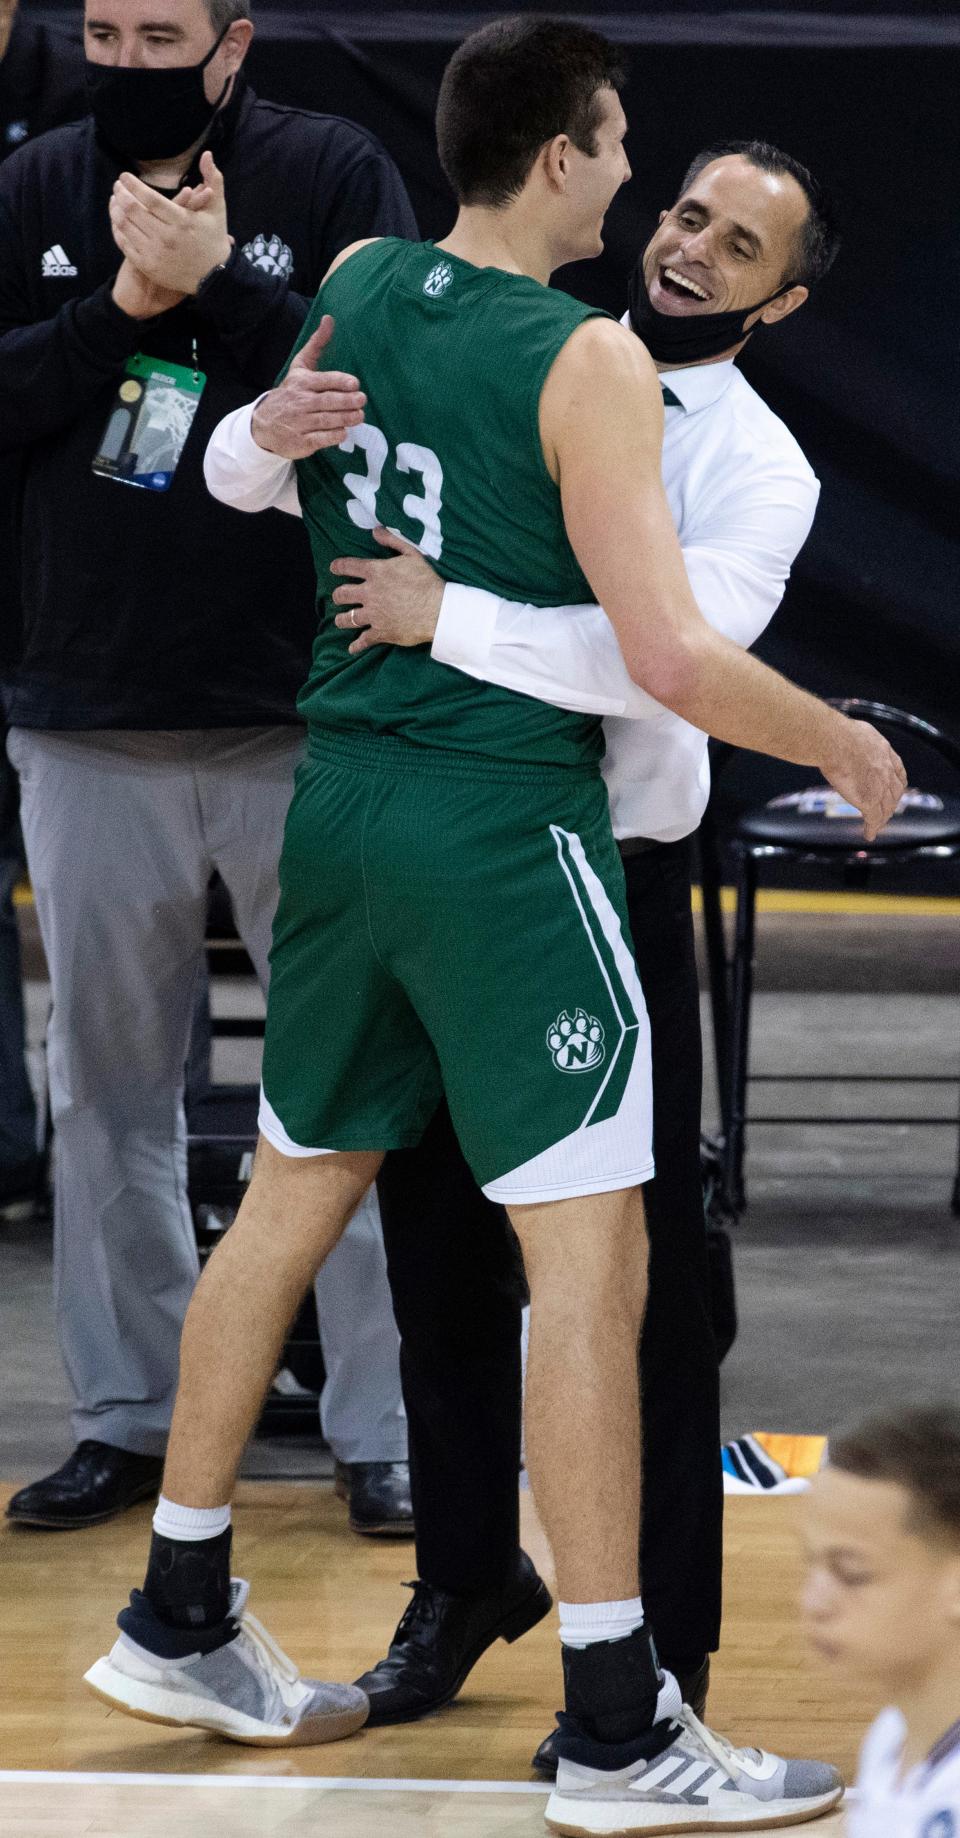 Northwest Missouri's Ryan Hawkins (33) and Northwest Missouri Head Coach Ben McCollum celebrate. Hawkins transferred to Creighton for the 2021-22 season and helped the Bluejays to the second round of the NCAA Tournament.